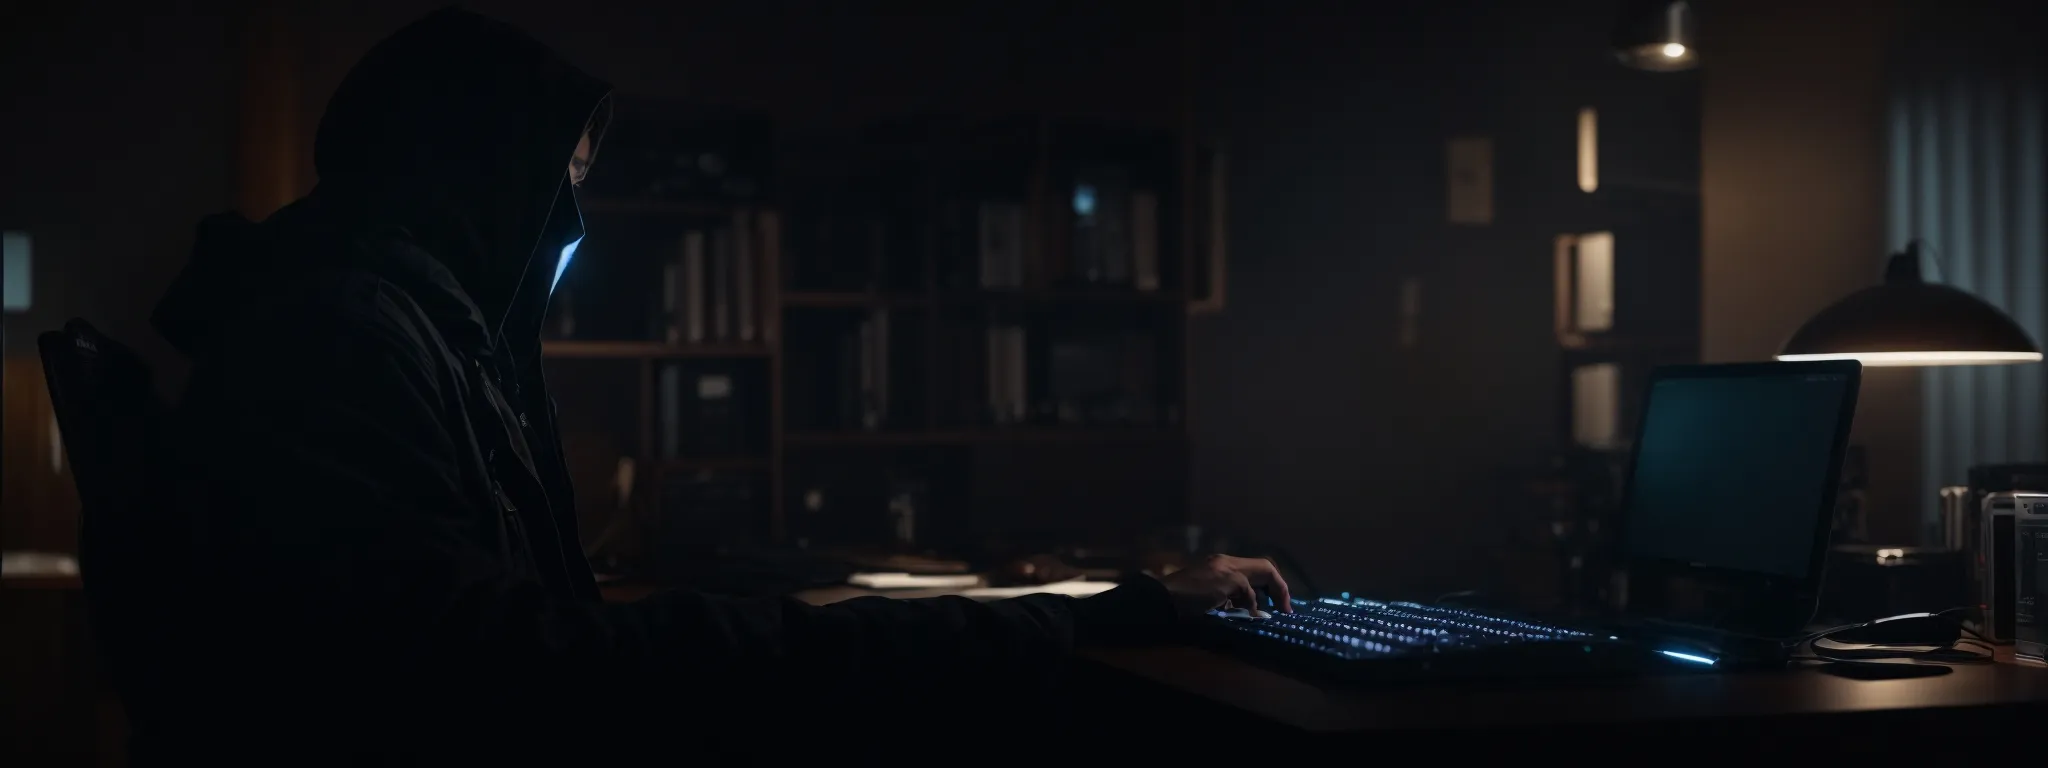 a shadowy figure typing at a computer with multiple web browser windows open, symbolizing covert online manipulation.